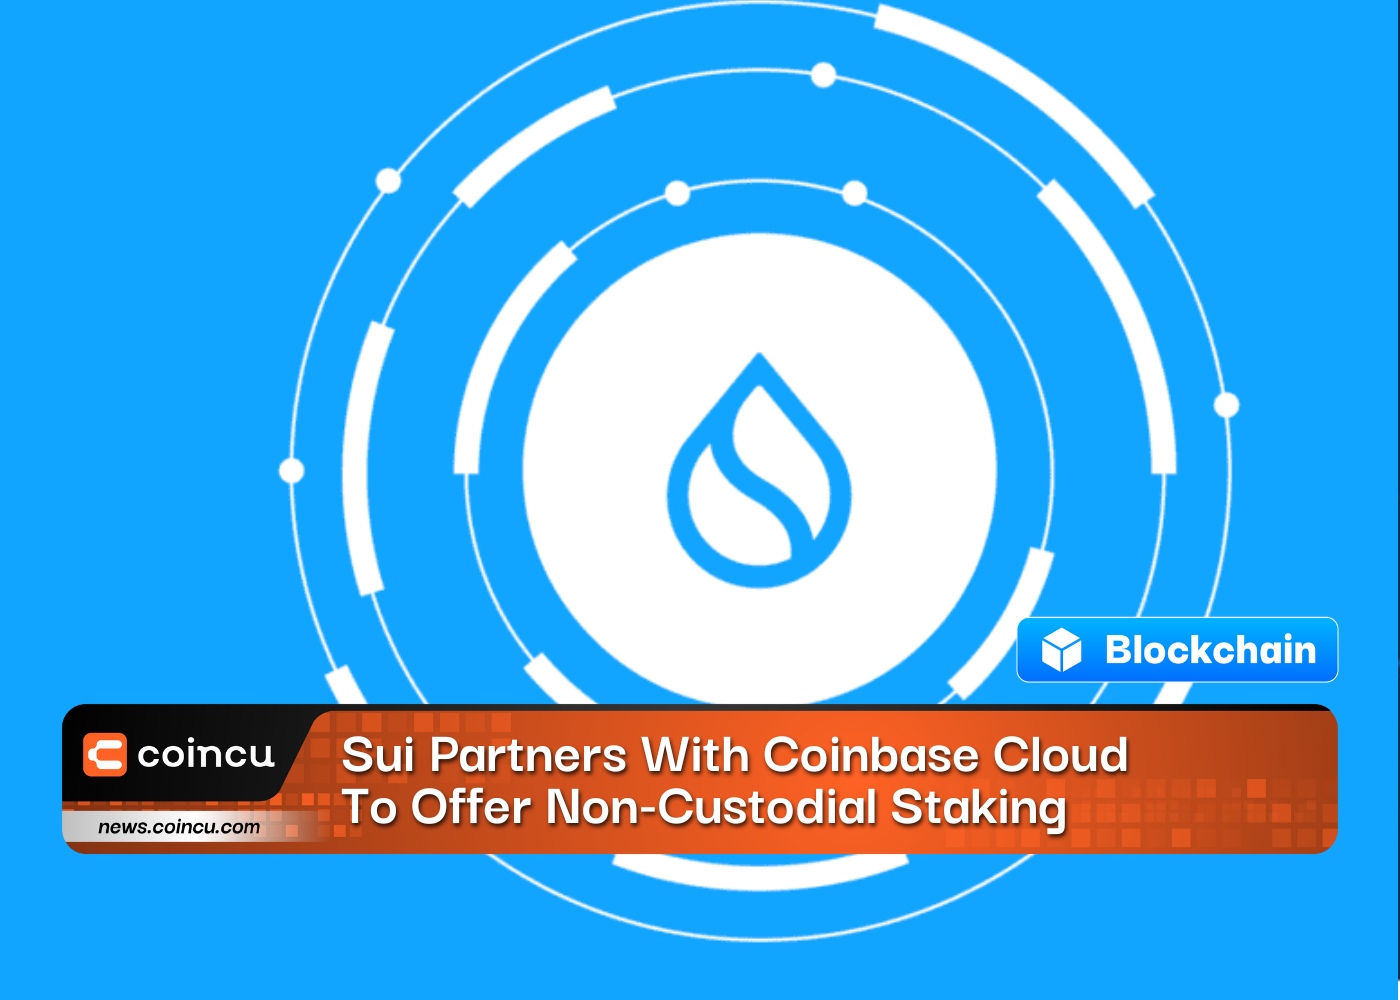 Sui Partners With Coinbase Cloud To Offer Non-Custodial Staking